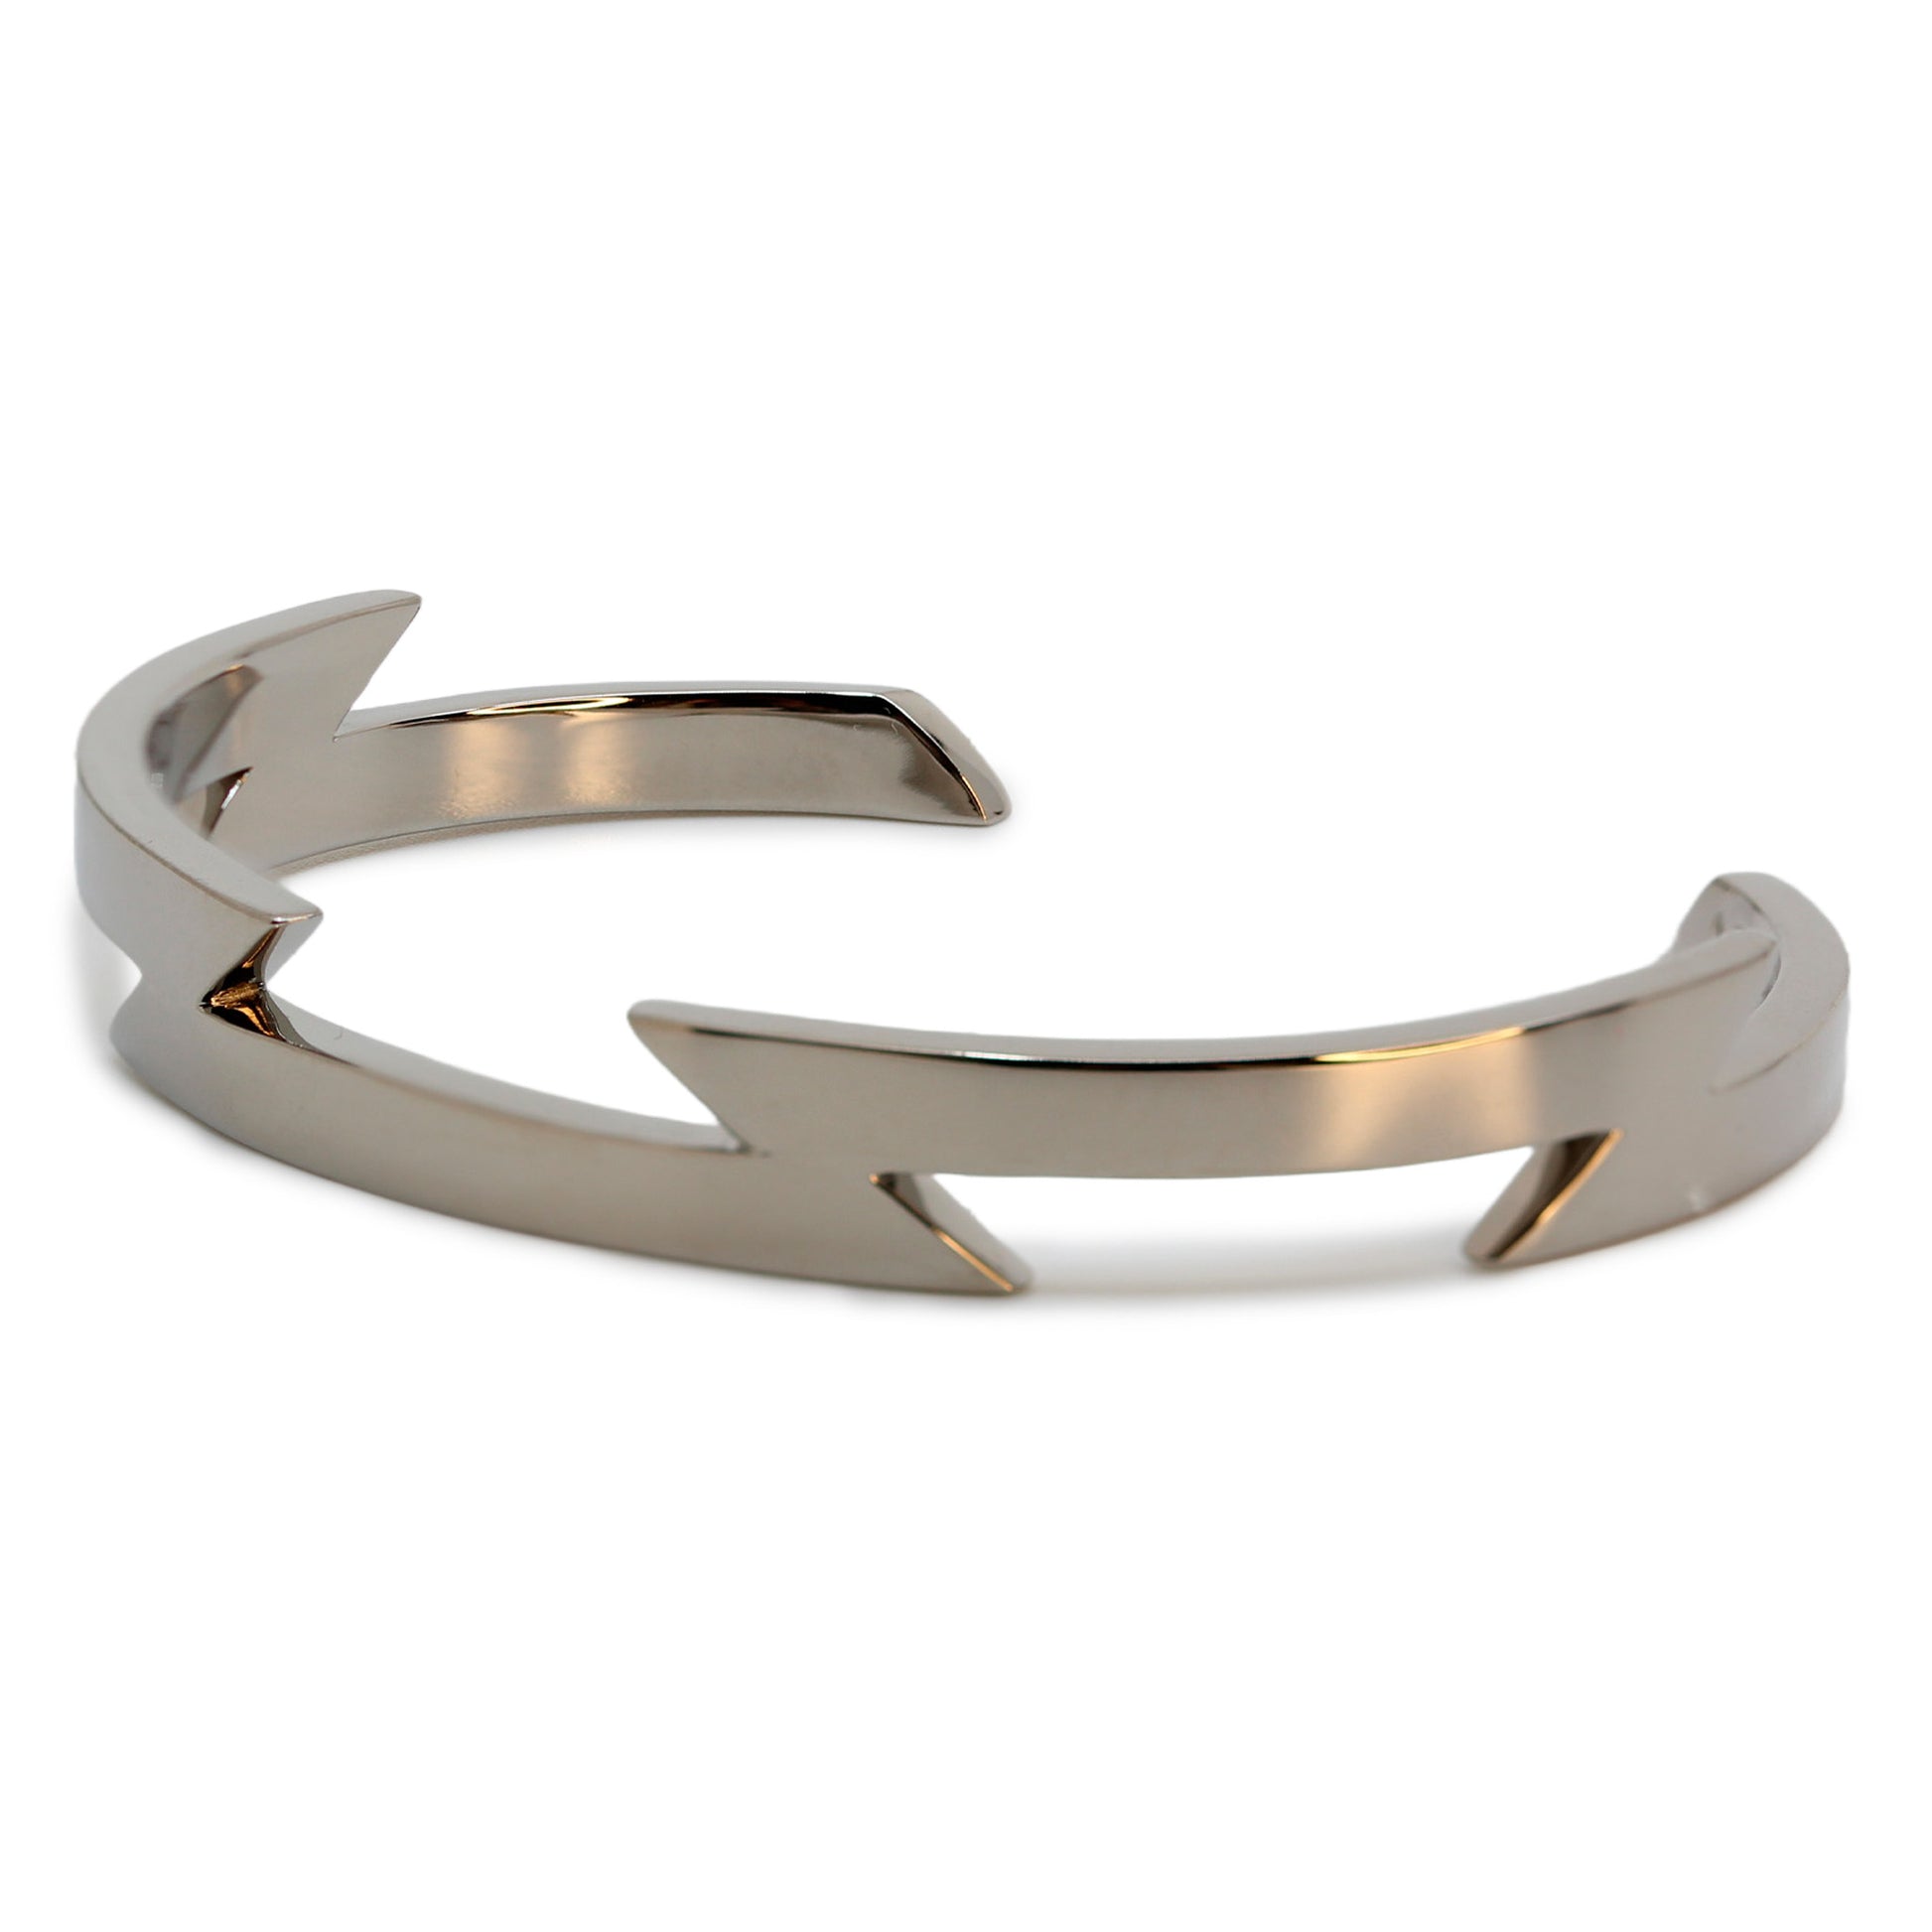 Single silver-colored titanium bangle with zig-zag pattern, 1 cm thick. Image shows corner view of bangle.